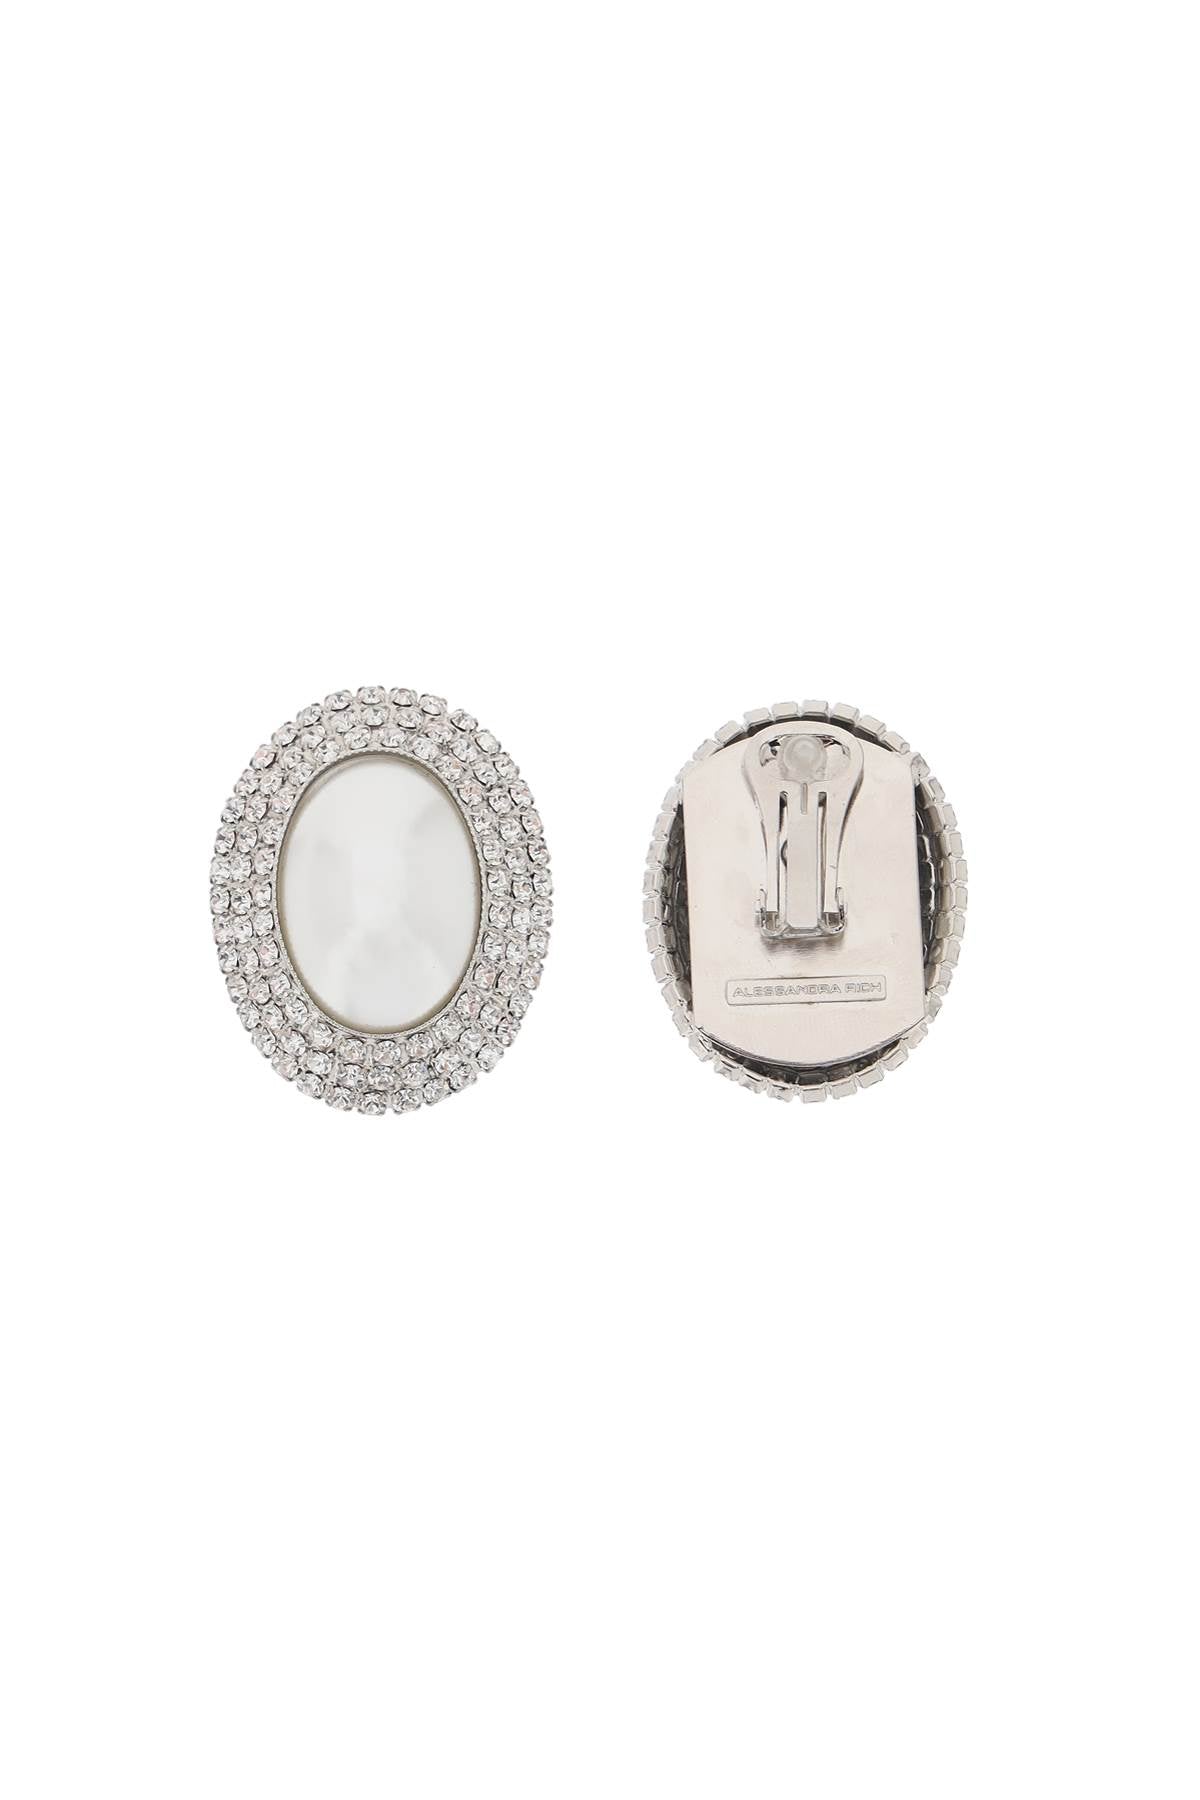 Alessandra rich oval earrings with pearl and crystals-2